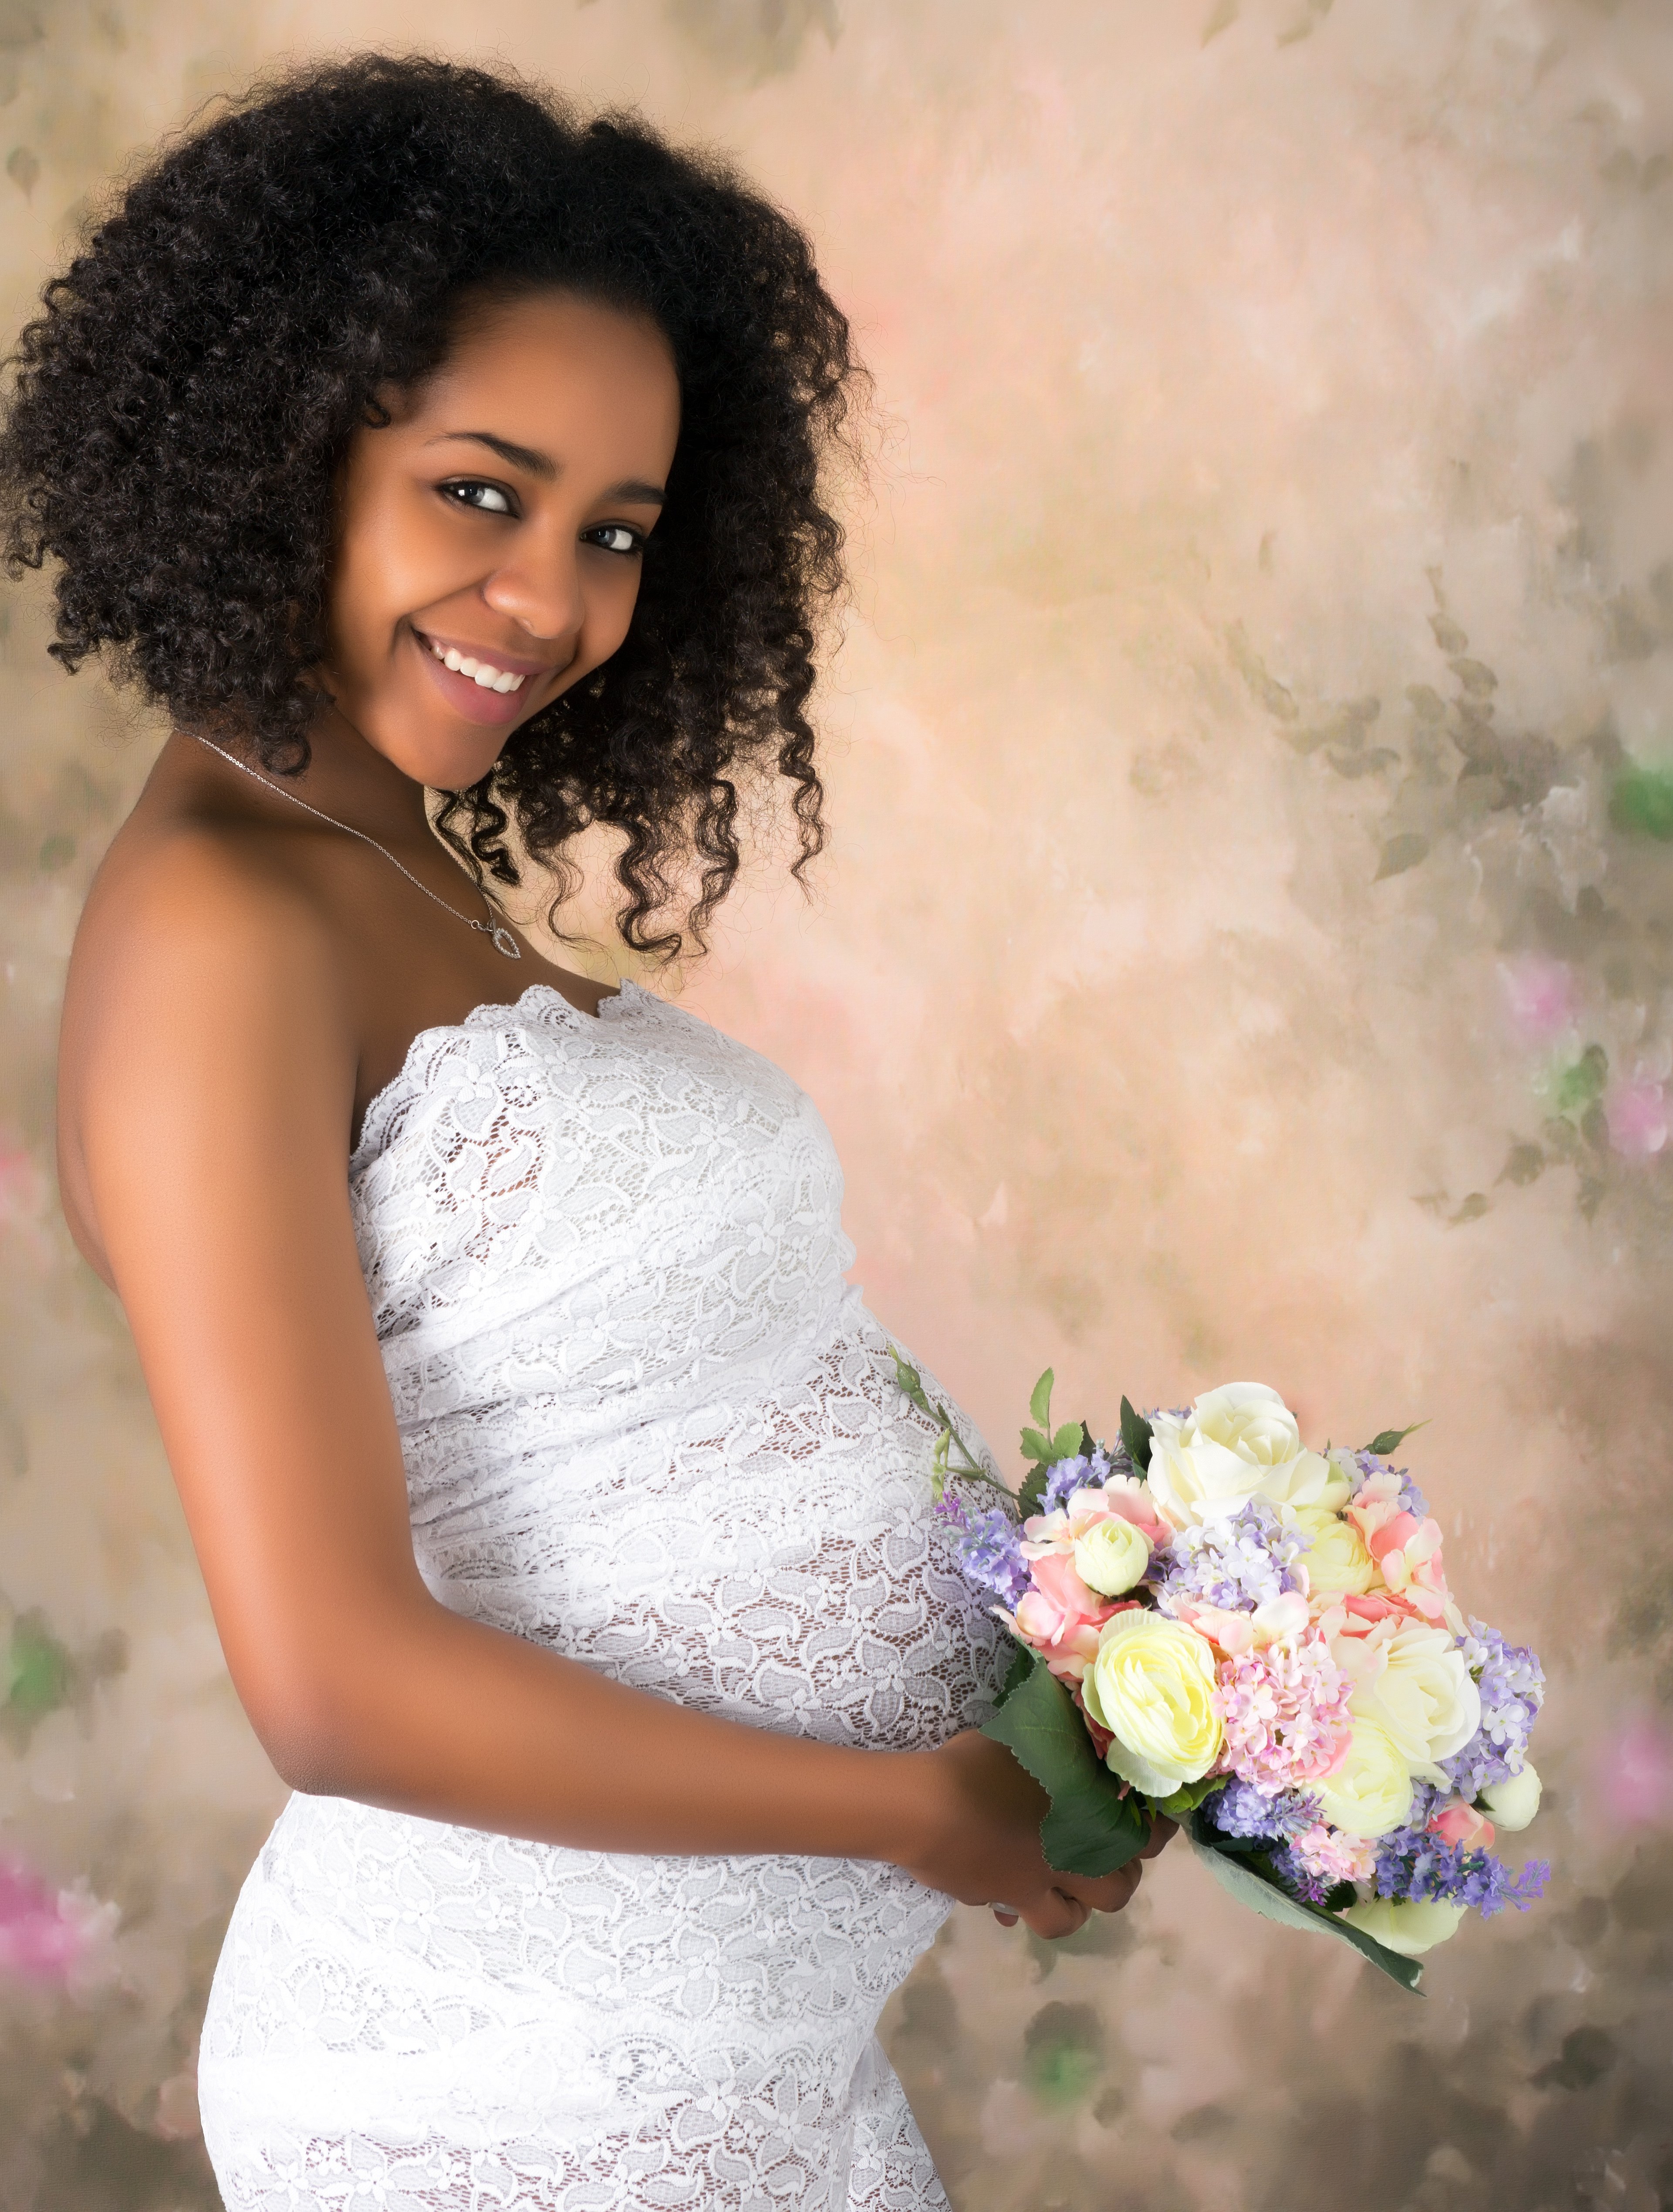 Pregnant bride about to get married | Photo: Shutterstock